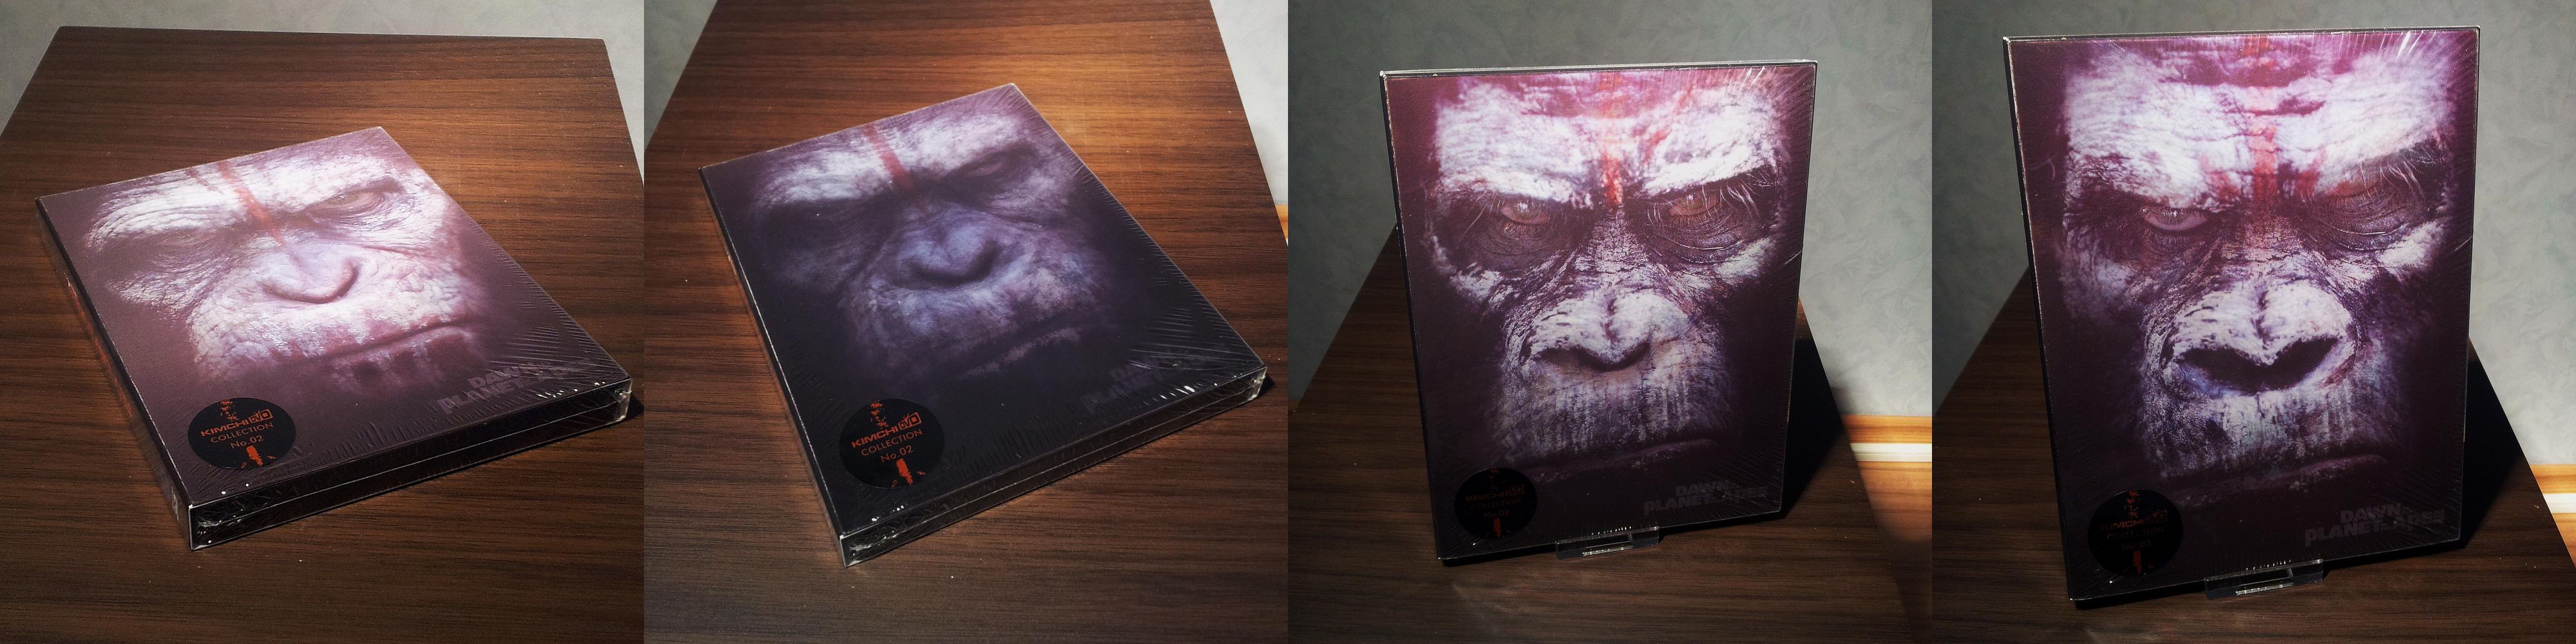 Dawn of the Planet of the Apes Kimchi Steelbook